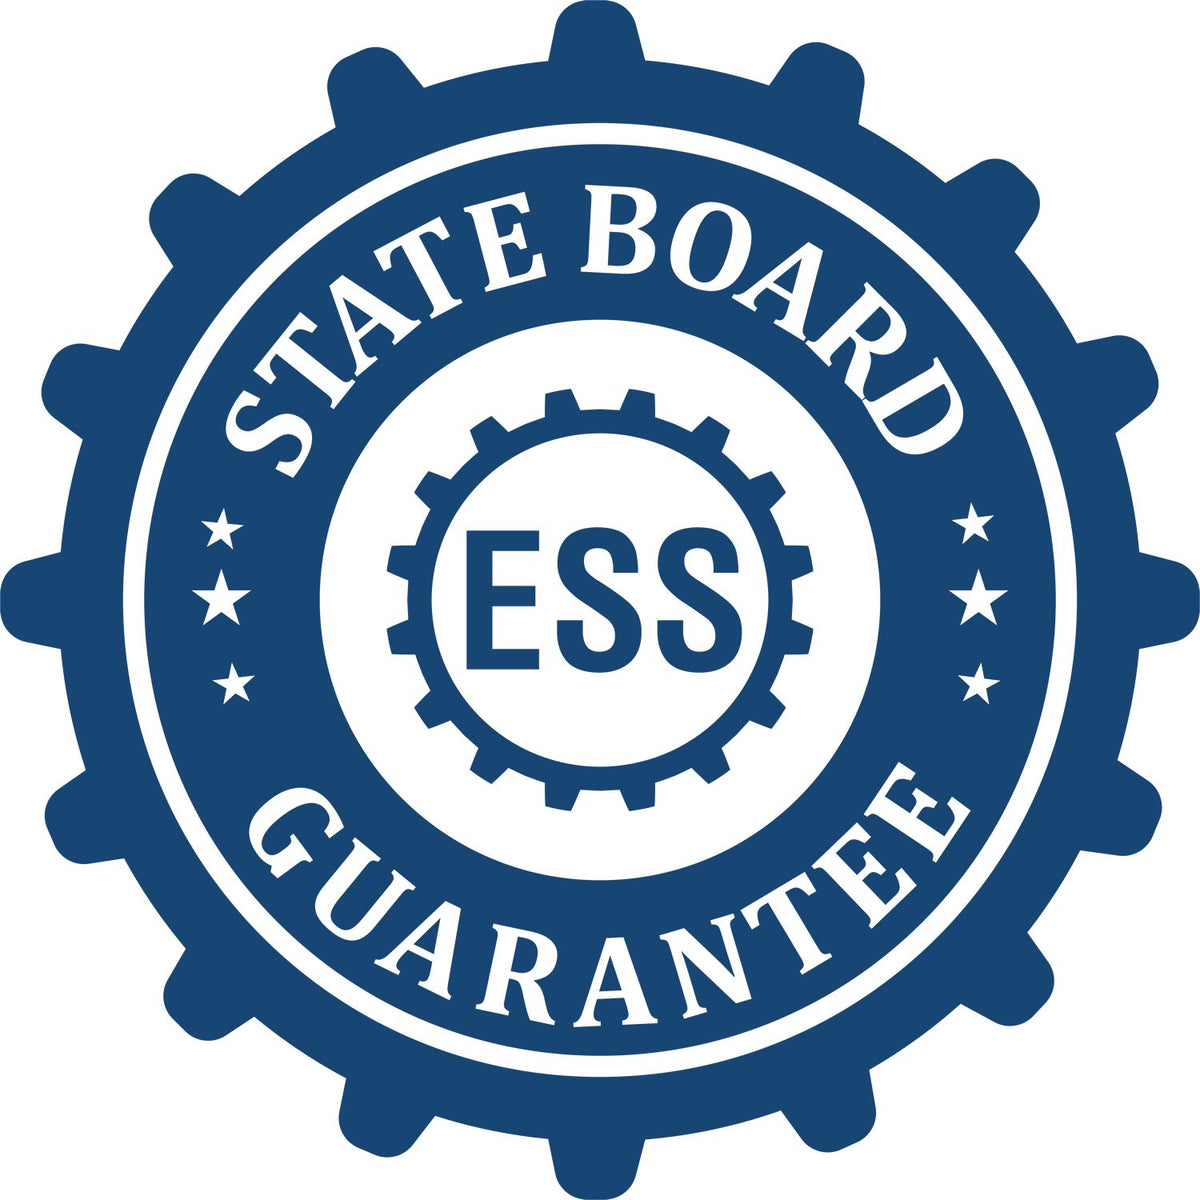 An emblem in a gear shape illustrating a state board guarantee for the State of New Hampshire Long Reach Architectural Embossing Seal product.